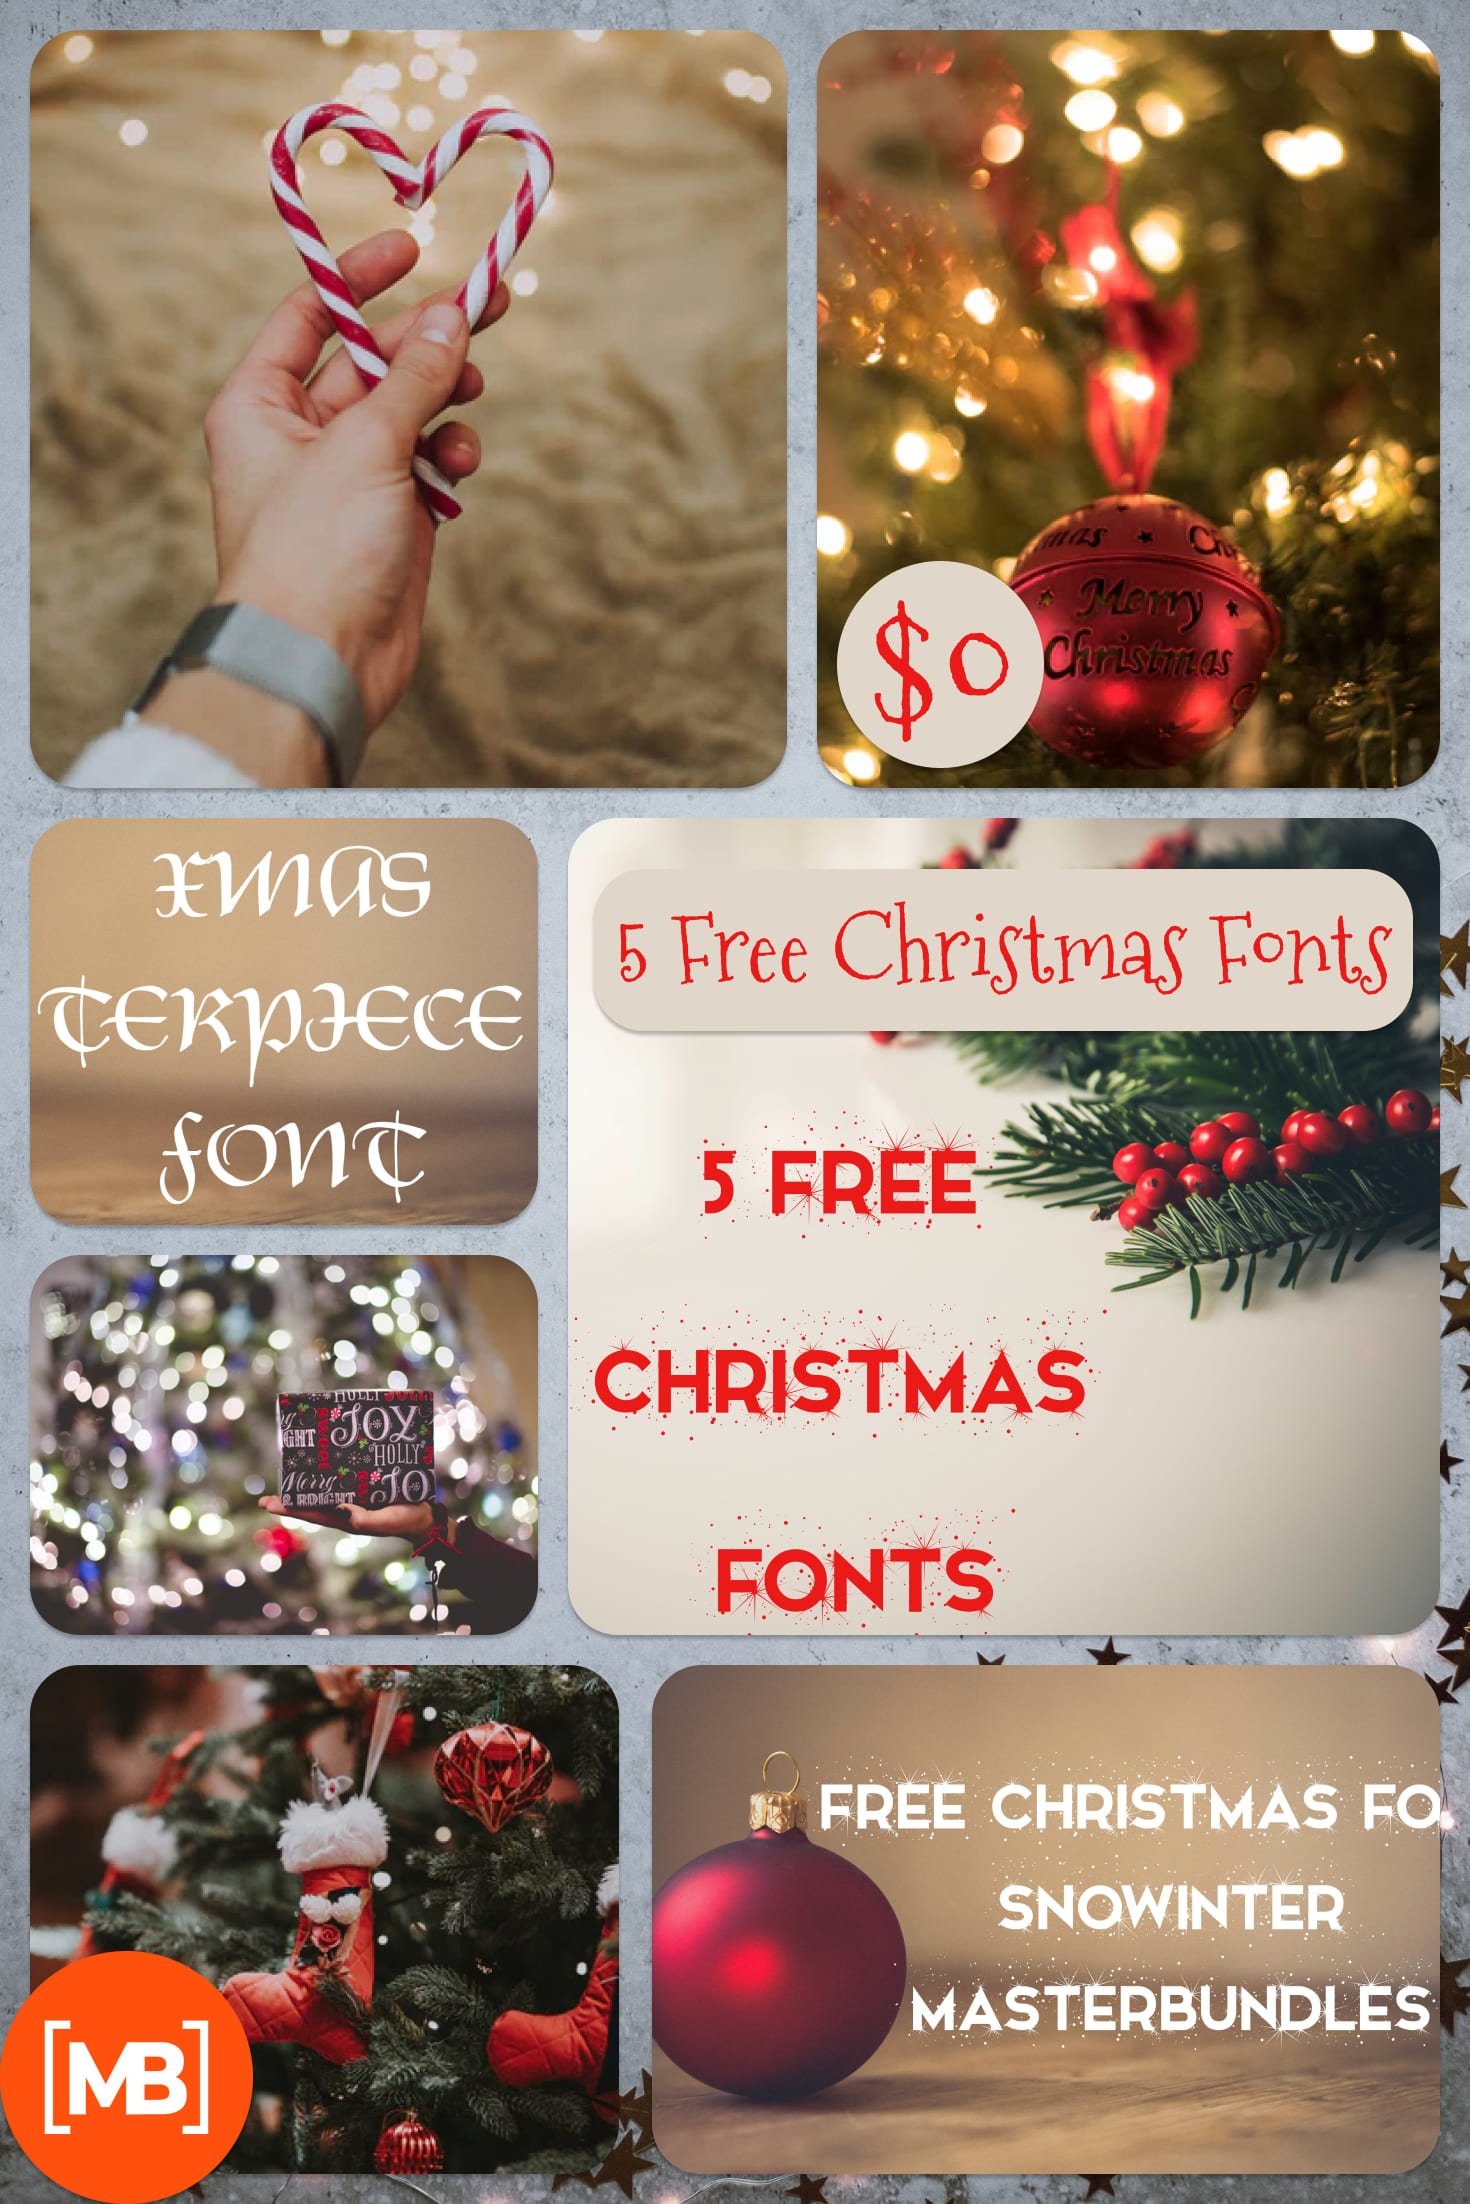 5 Free Christmas Fonts. Collage Image.